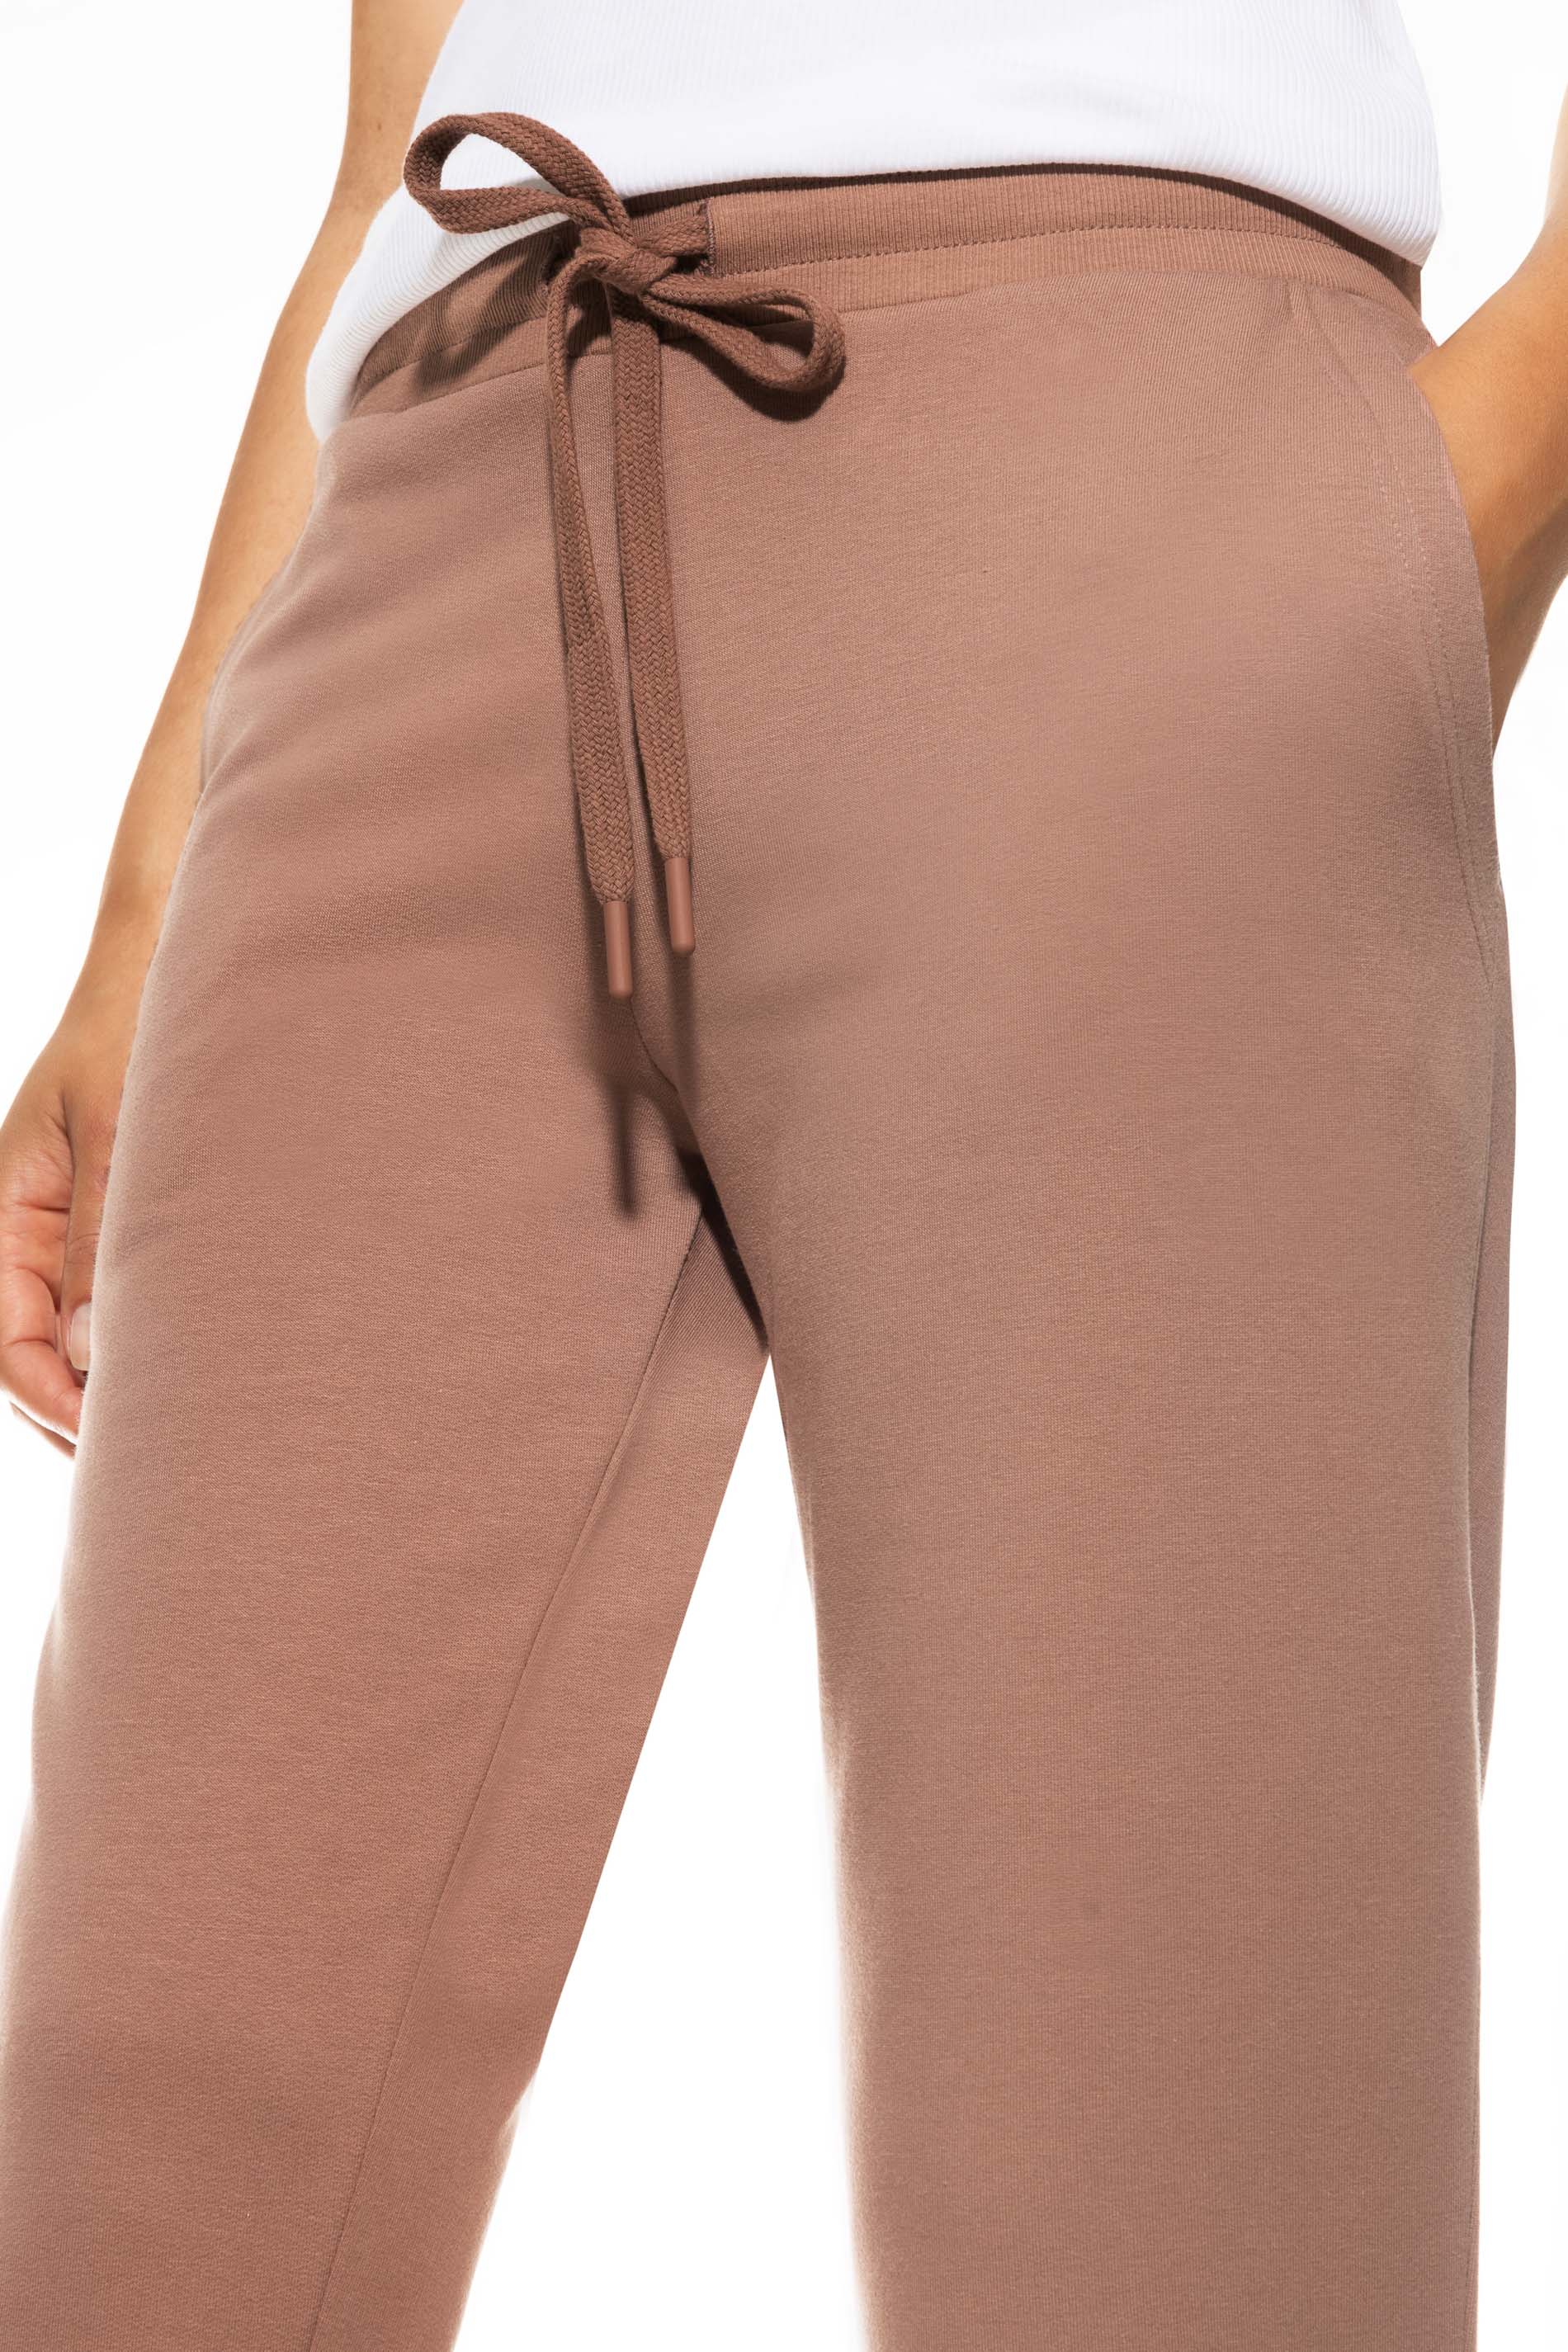 Bottoms Serie Rose Detail View 01 | mey®